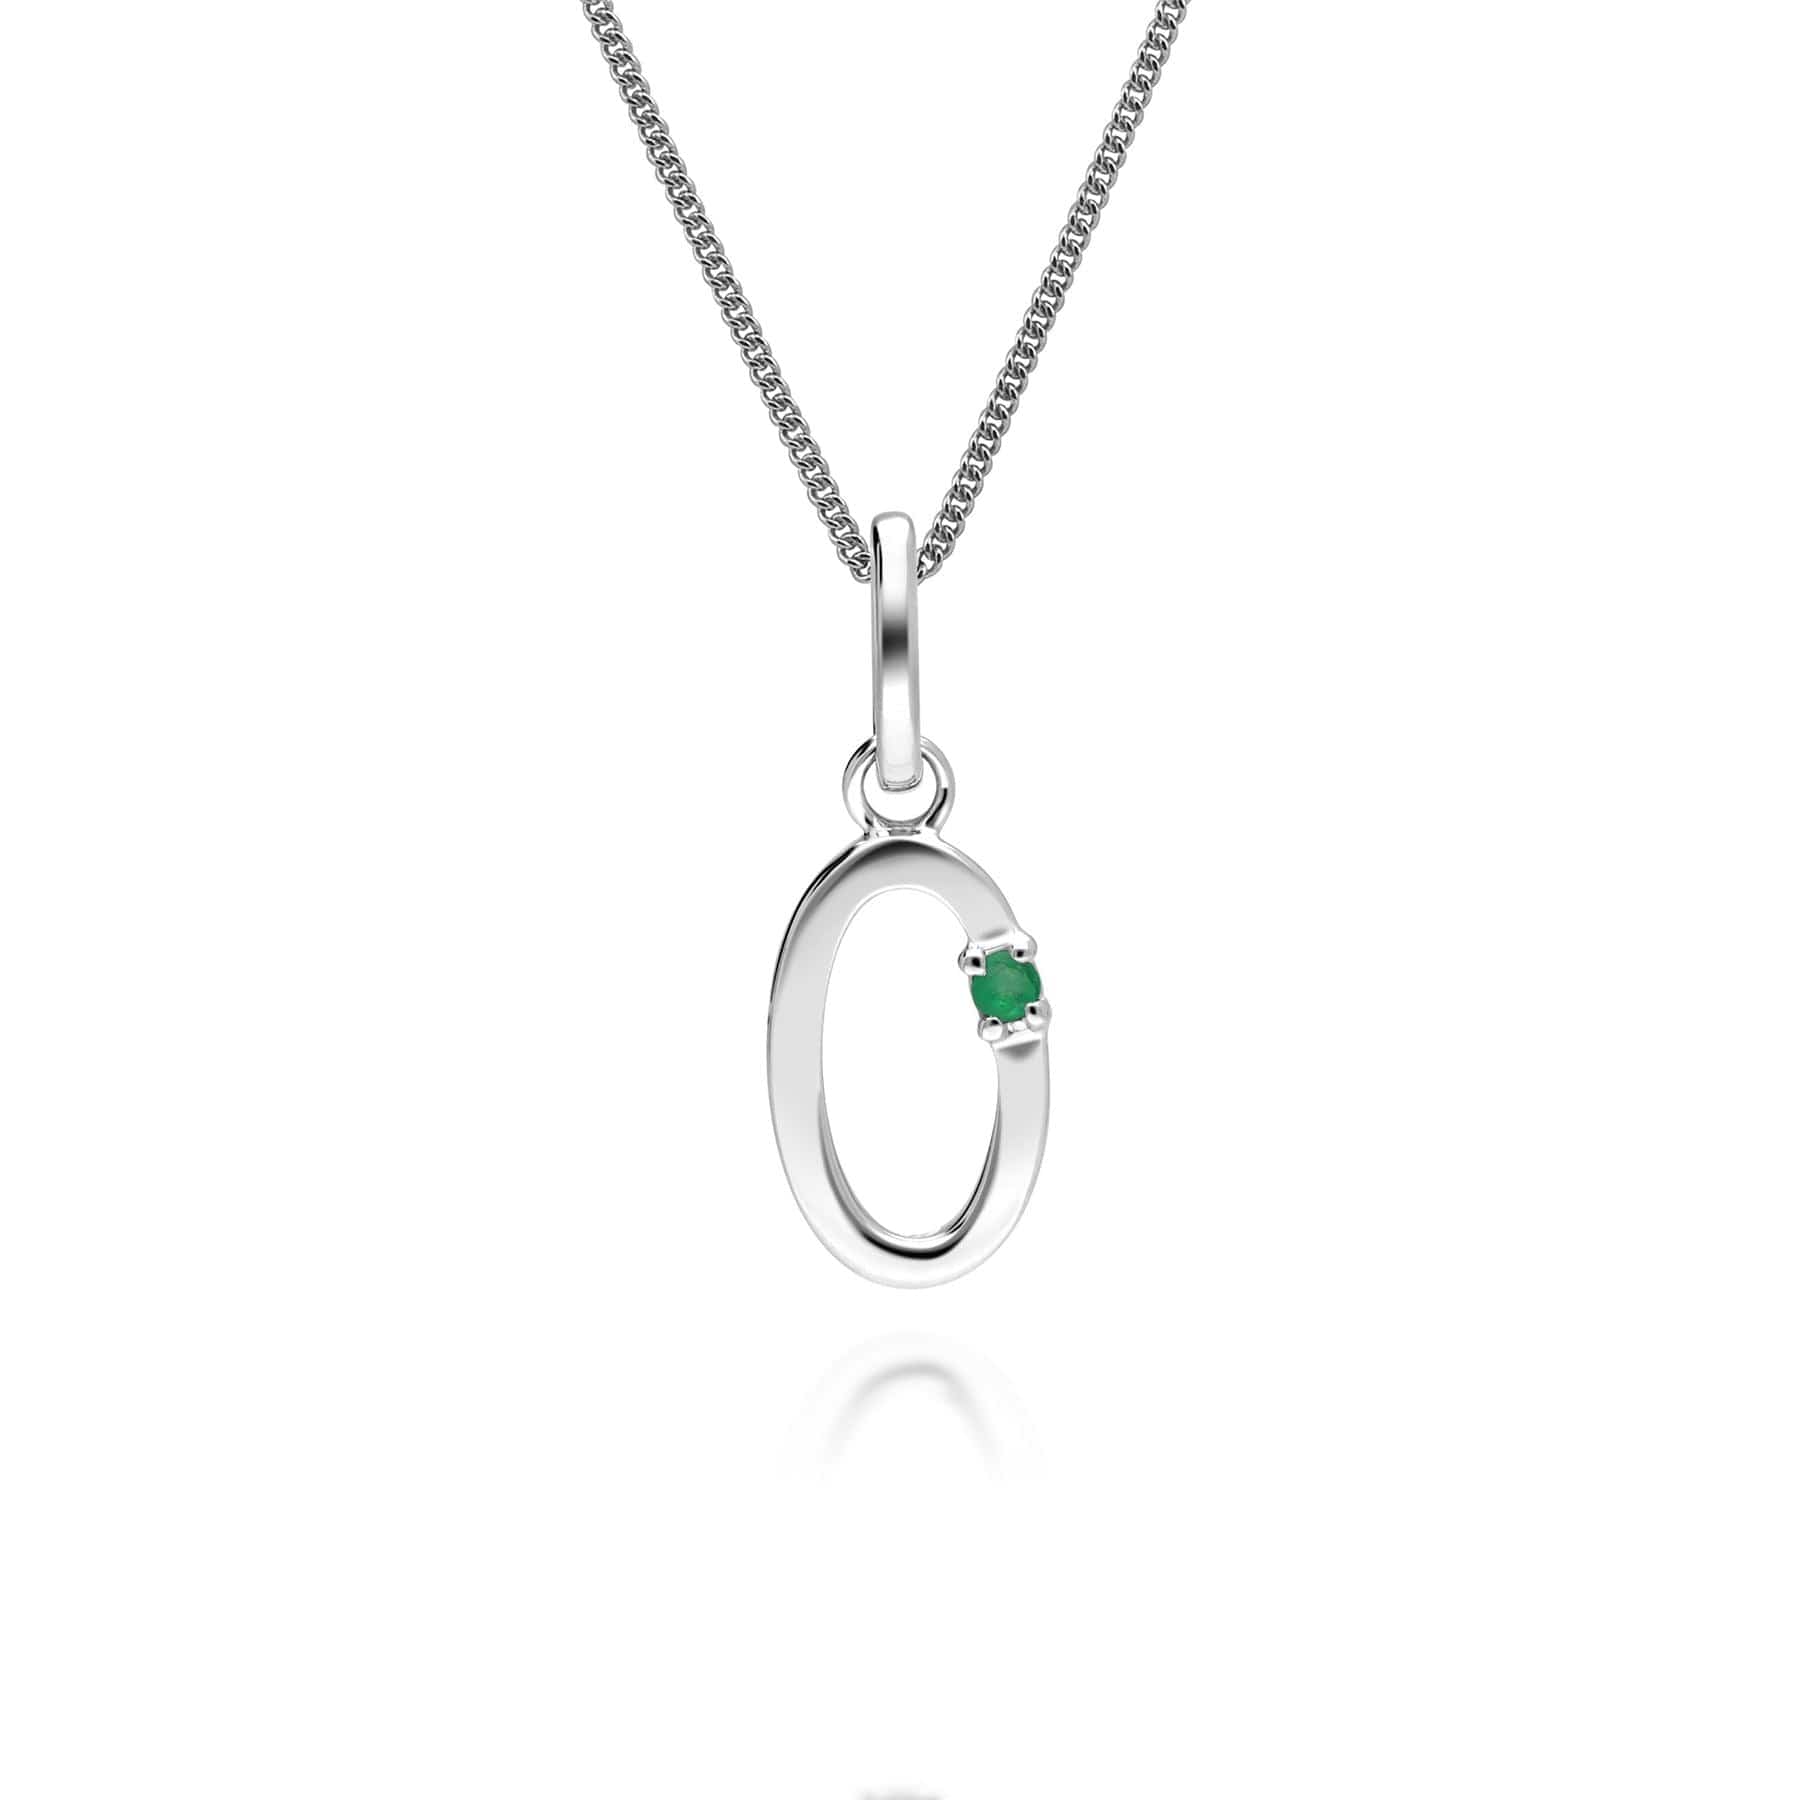 162P0251019 Initial Emerald Letter Charm Necklace in 9ct White Gold 14